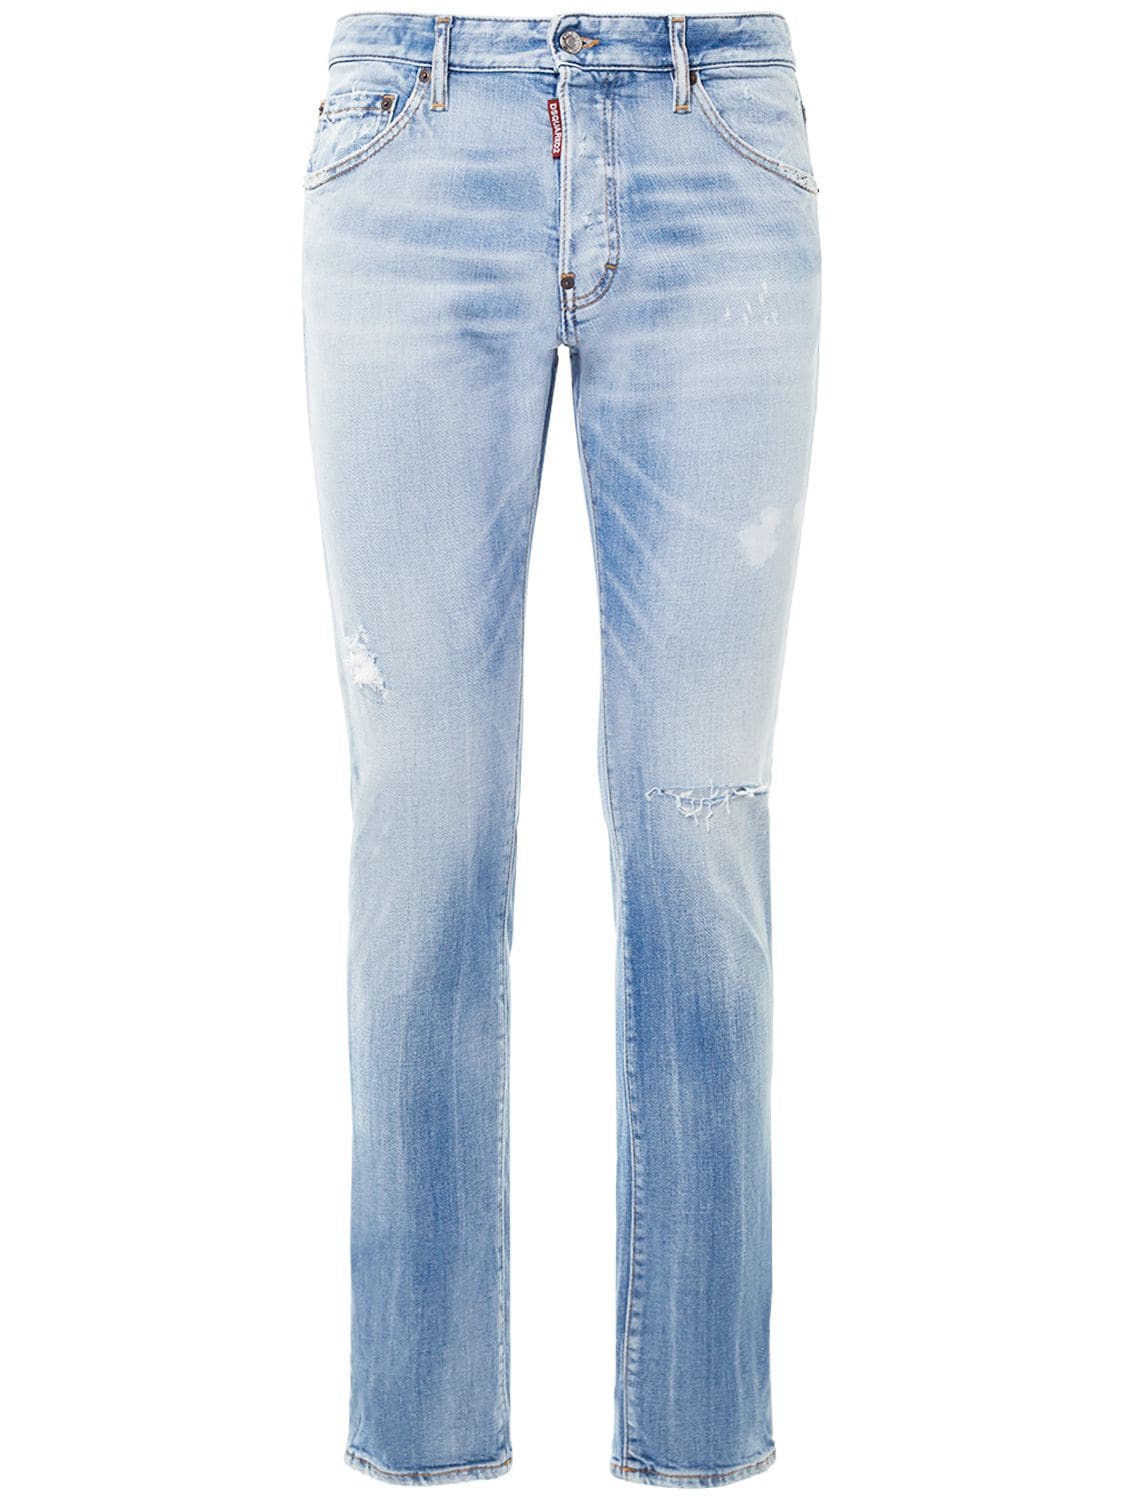 Image of Cool Guy Stretch Denim Jeans